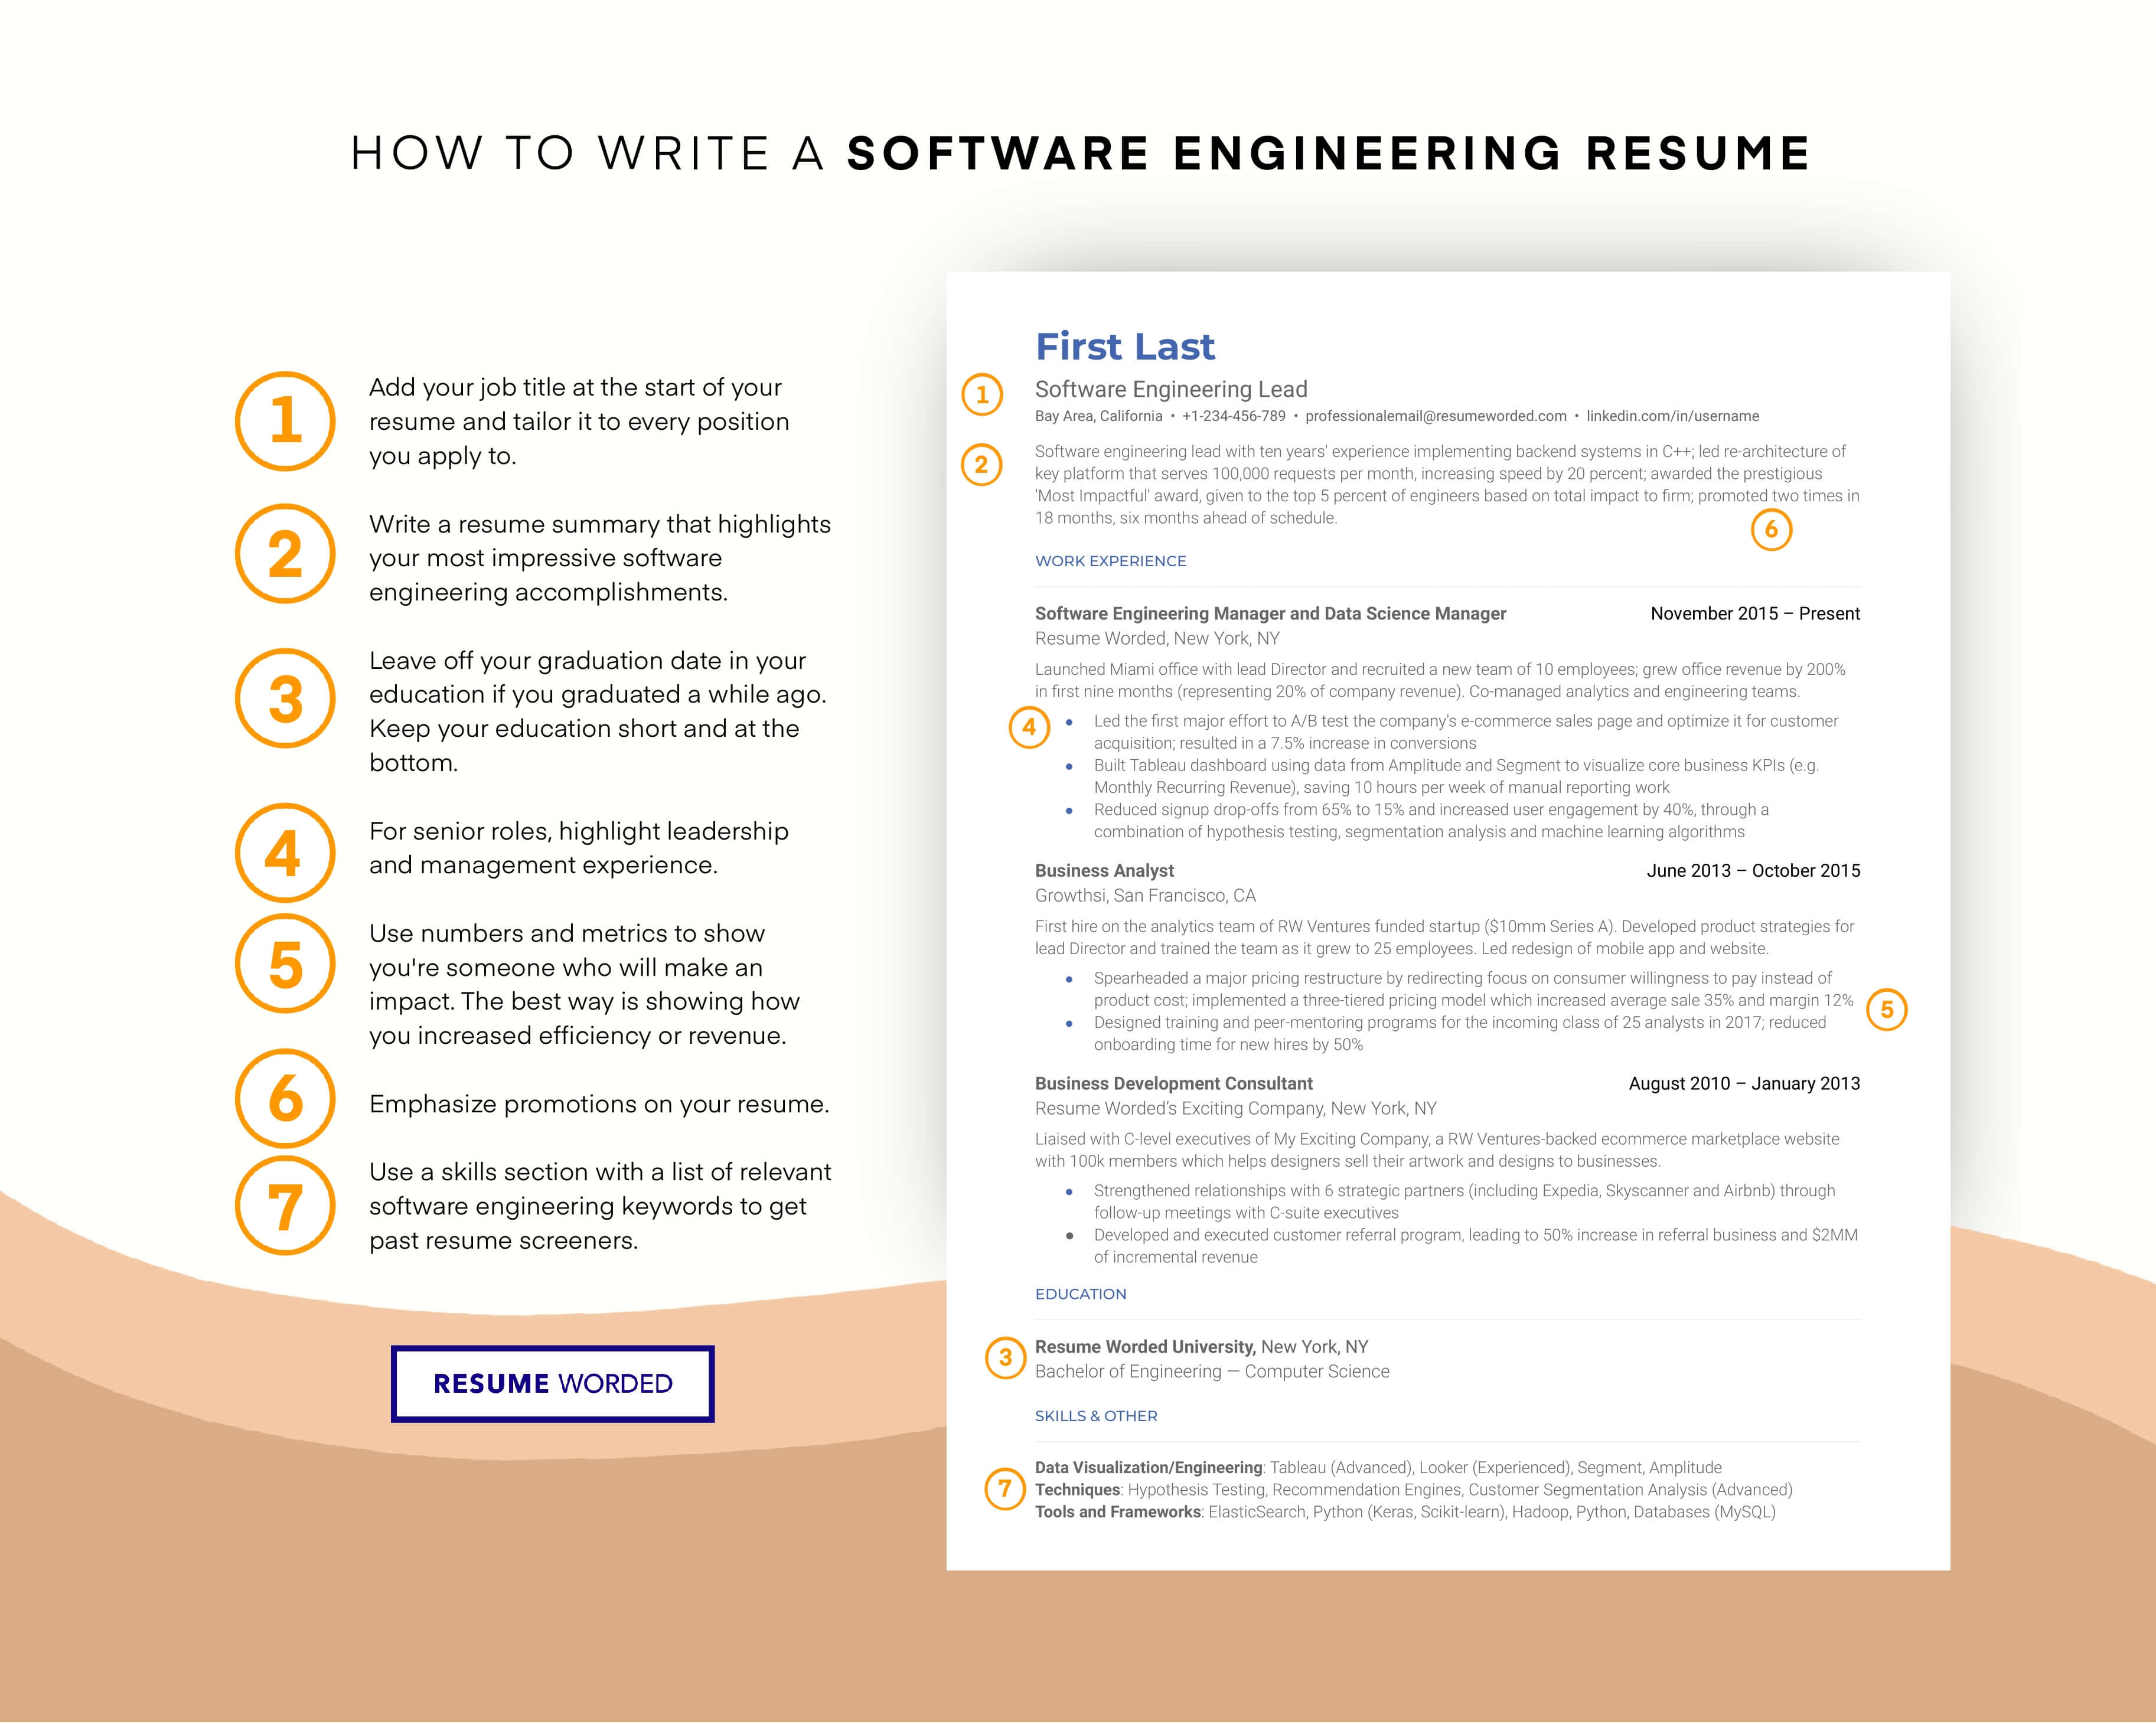 Highlight software system certification and experience. - Business System Analyst Resume